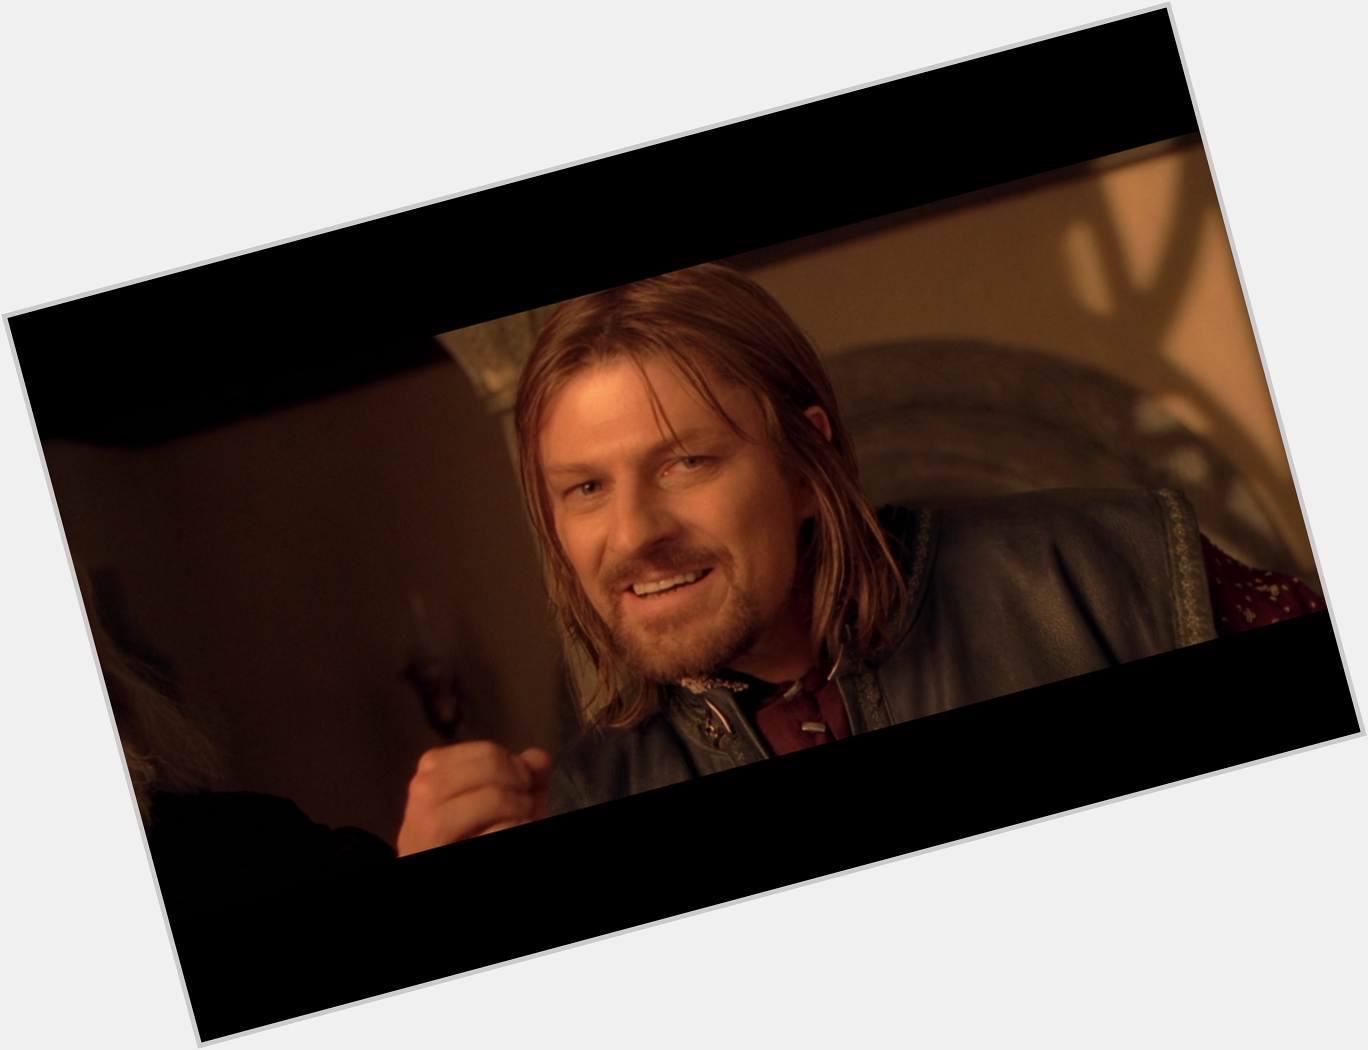 One does not simply let today pass without wishing Sean Bean a happy birthday 